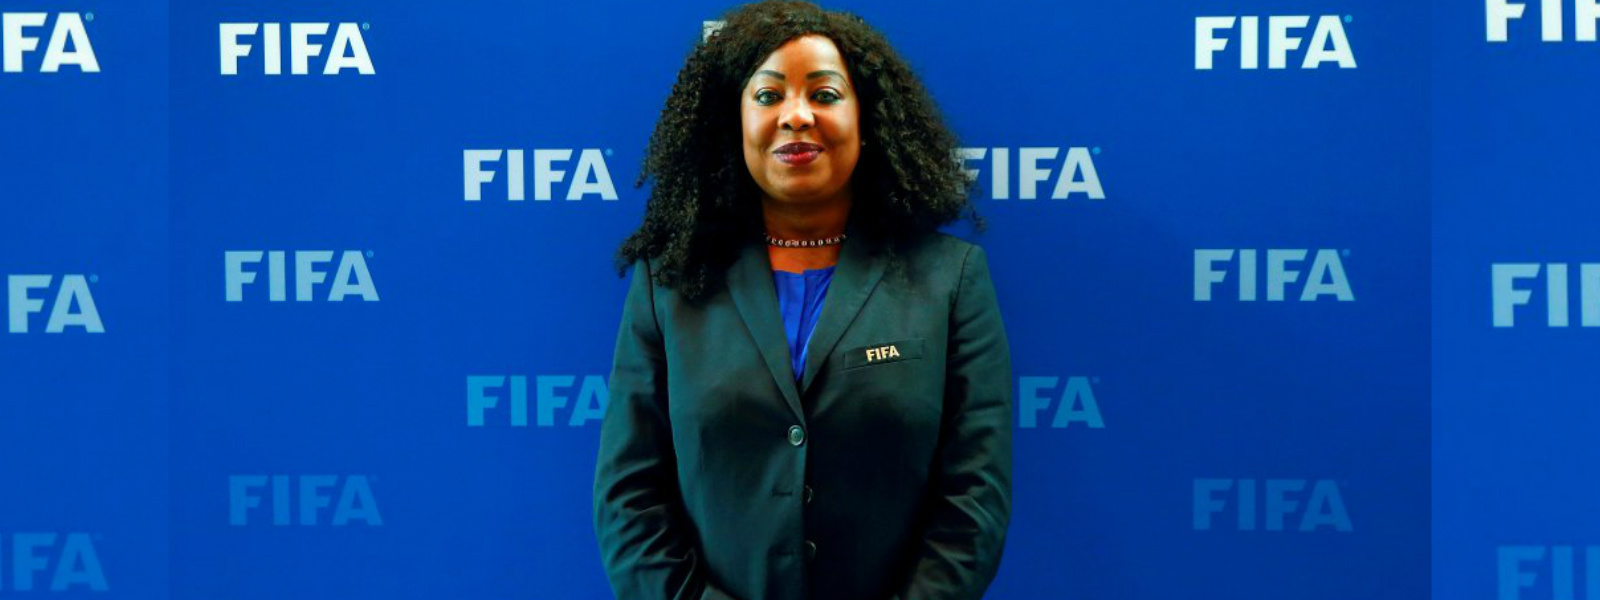 FIFA secretary general reported to ethics chiefs